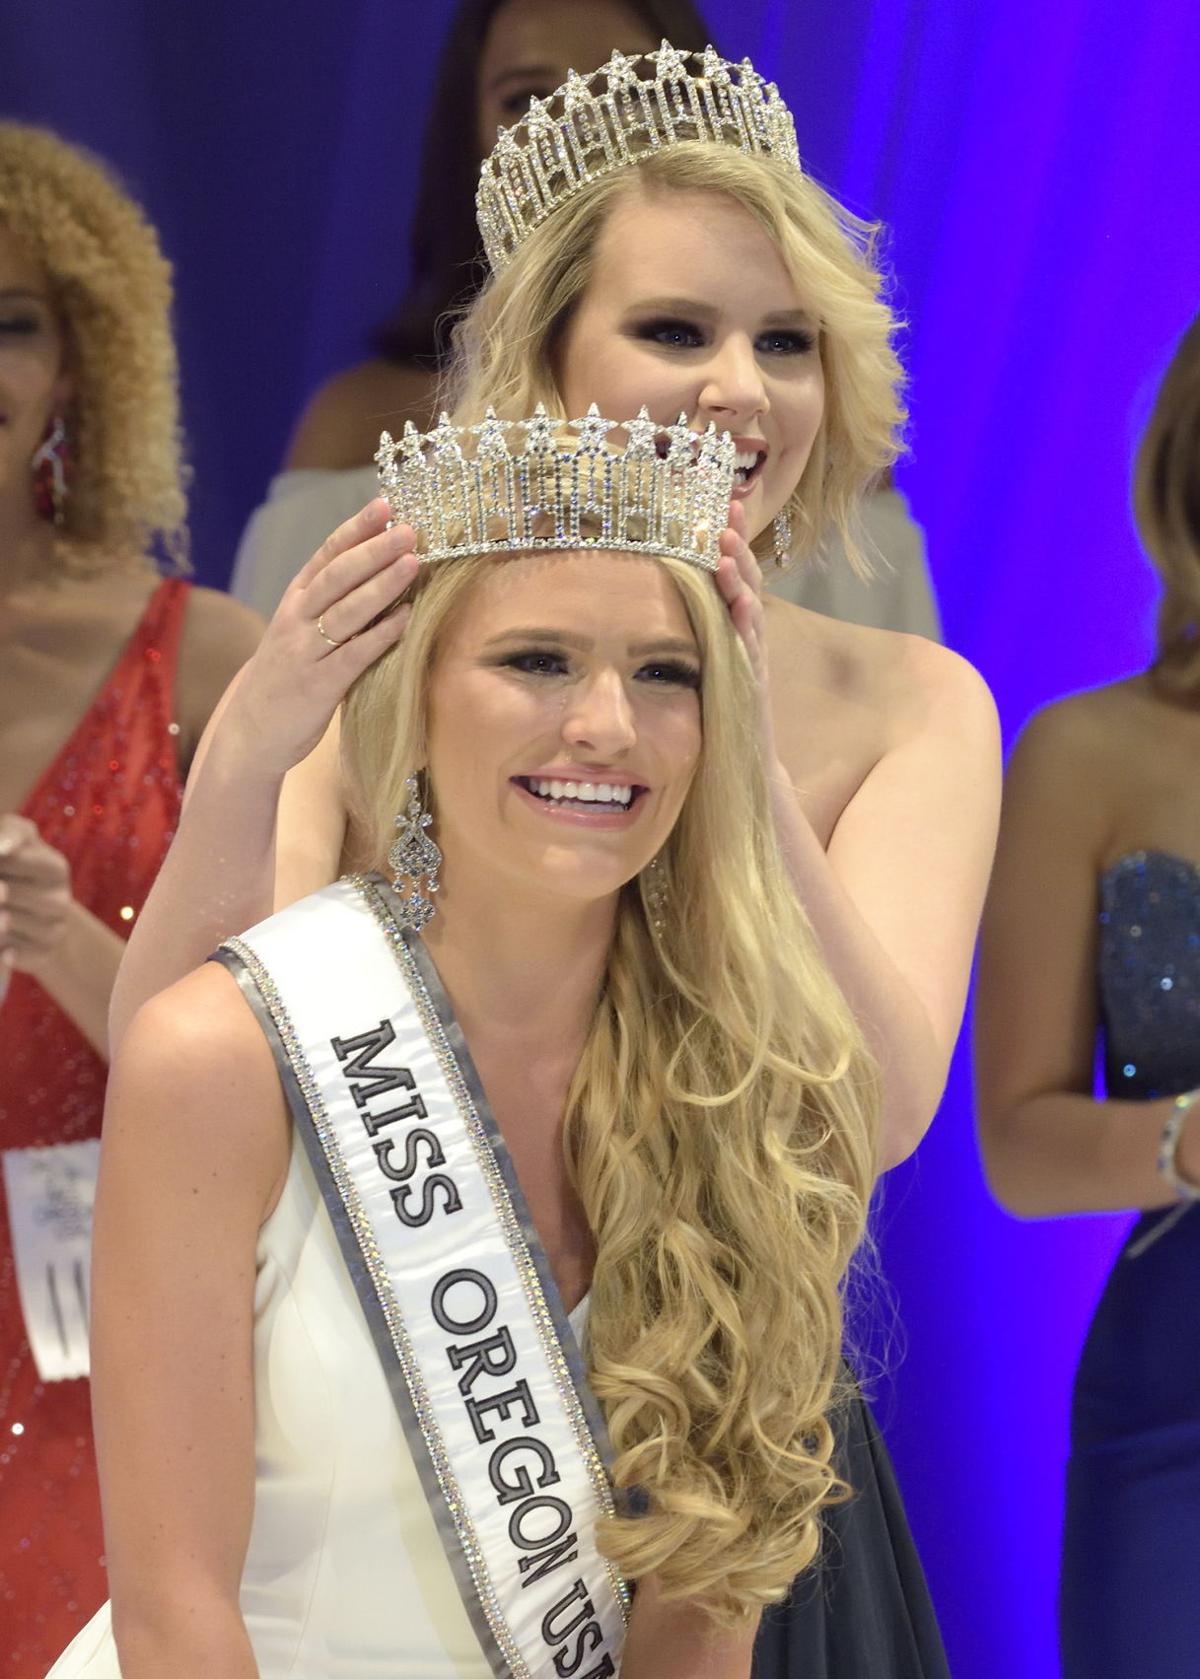 Miss Oregon USA 2018's residency called into question Local News